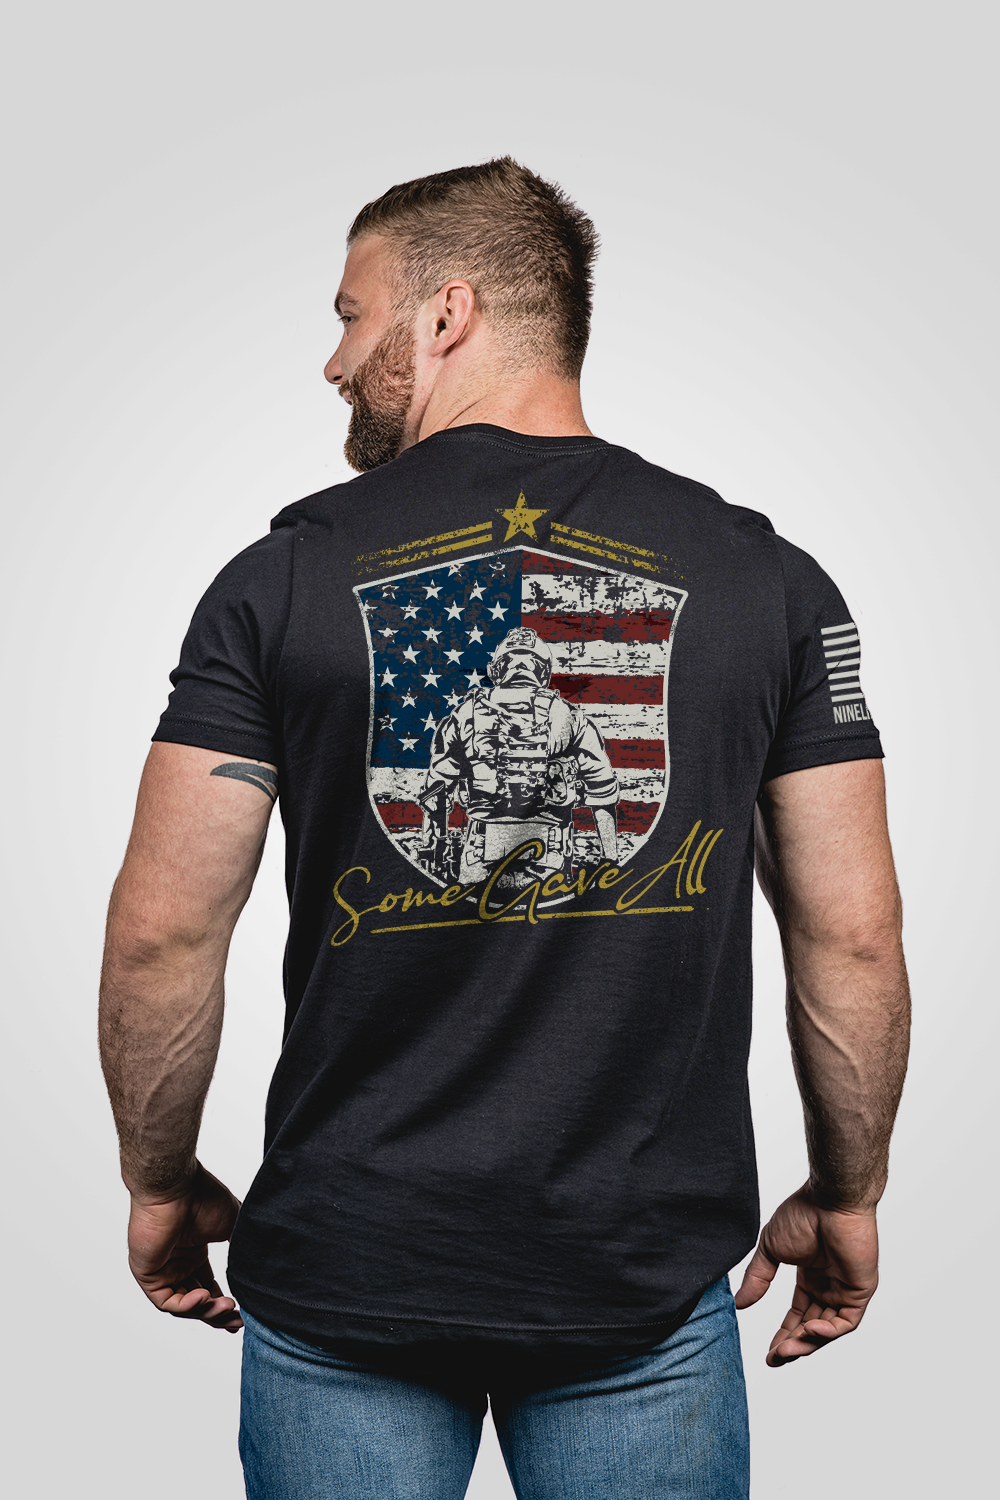 Image of Men's T-Shirt - Some Gave All